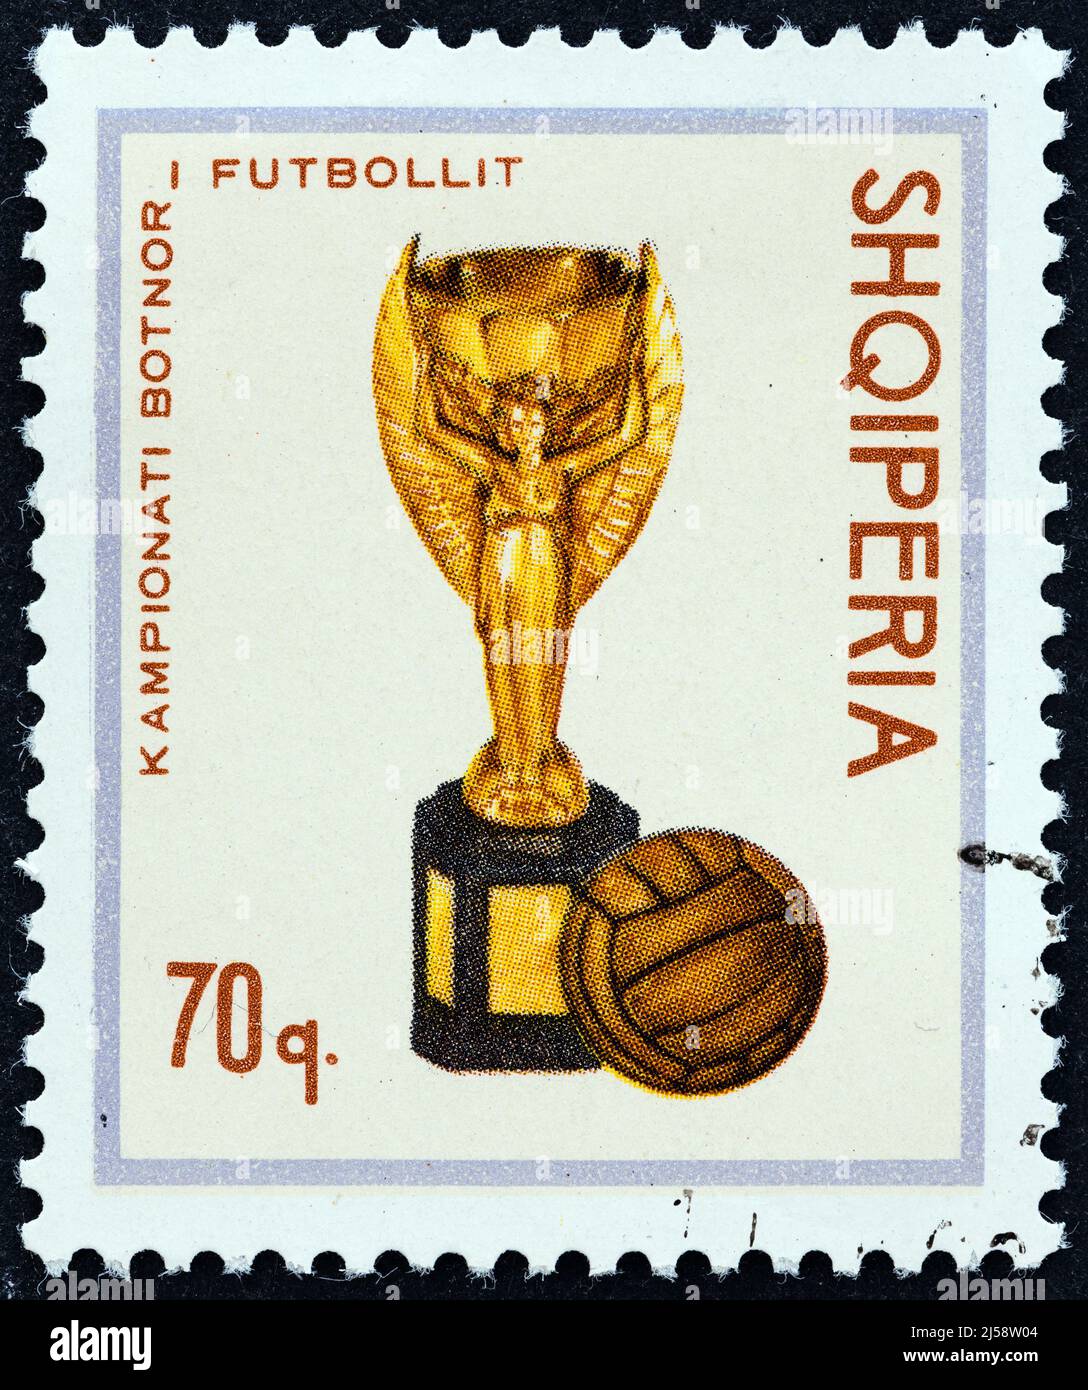 ALBANIA - CIRCA 1966: A stamp printed in Albania from the 'Football World Cup - England' issue shows Jules Rimet Cup and Football, circa 1966. Stock Photo